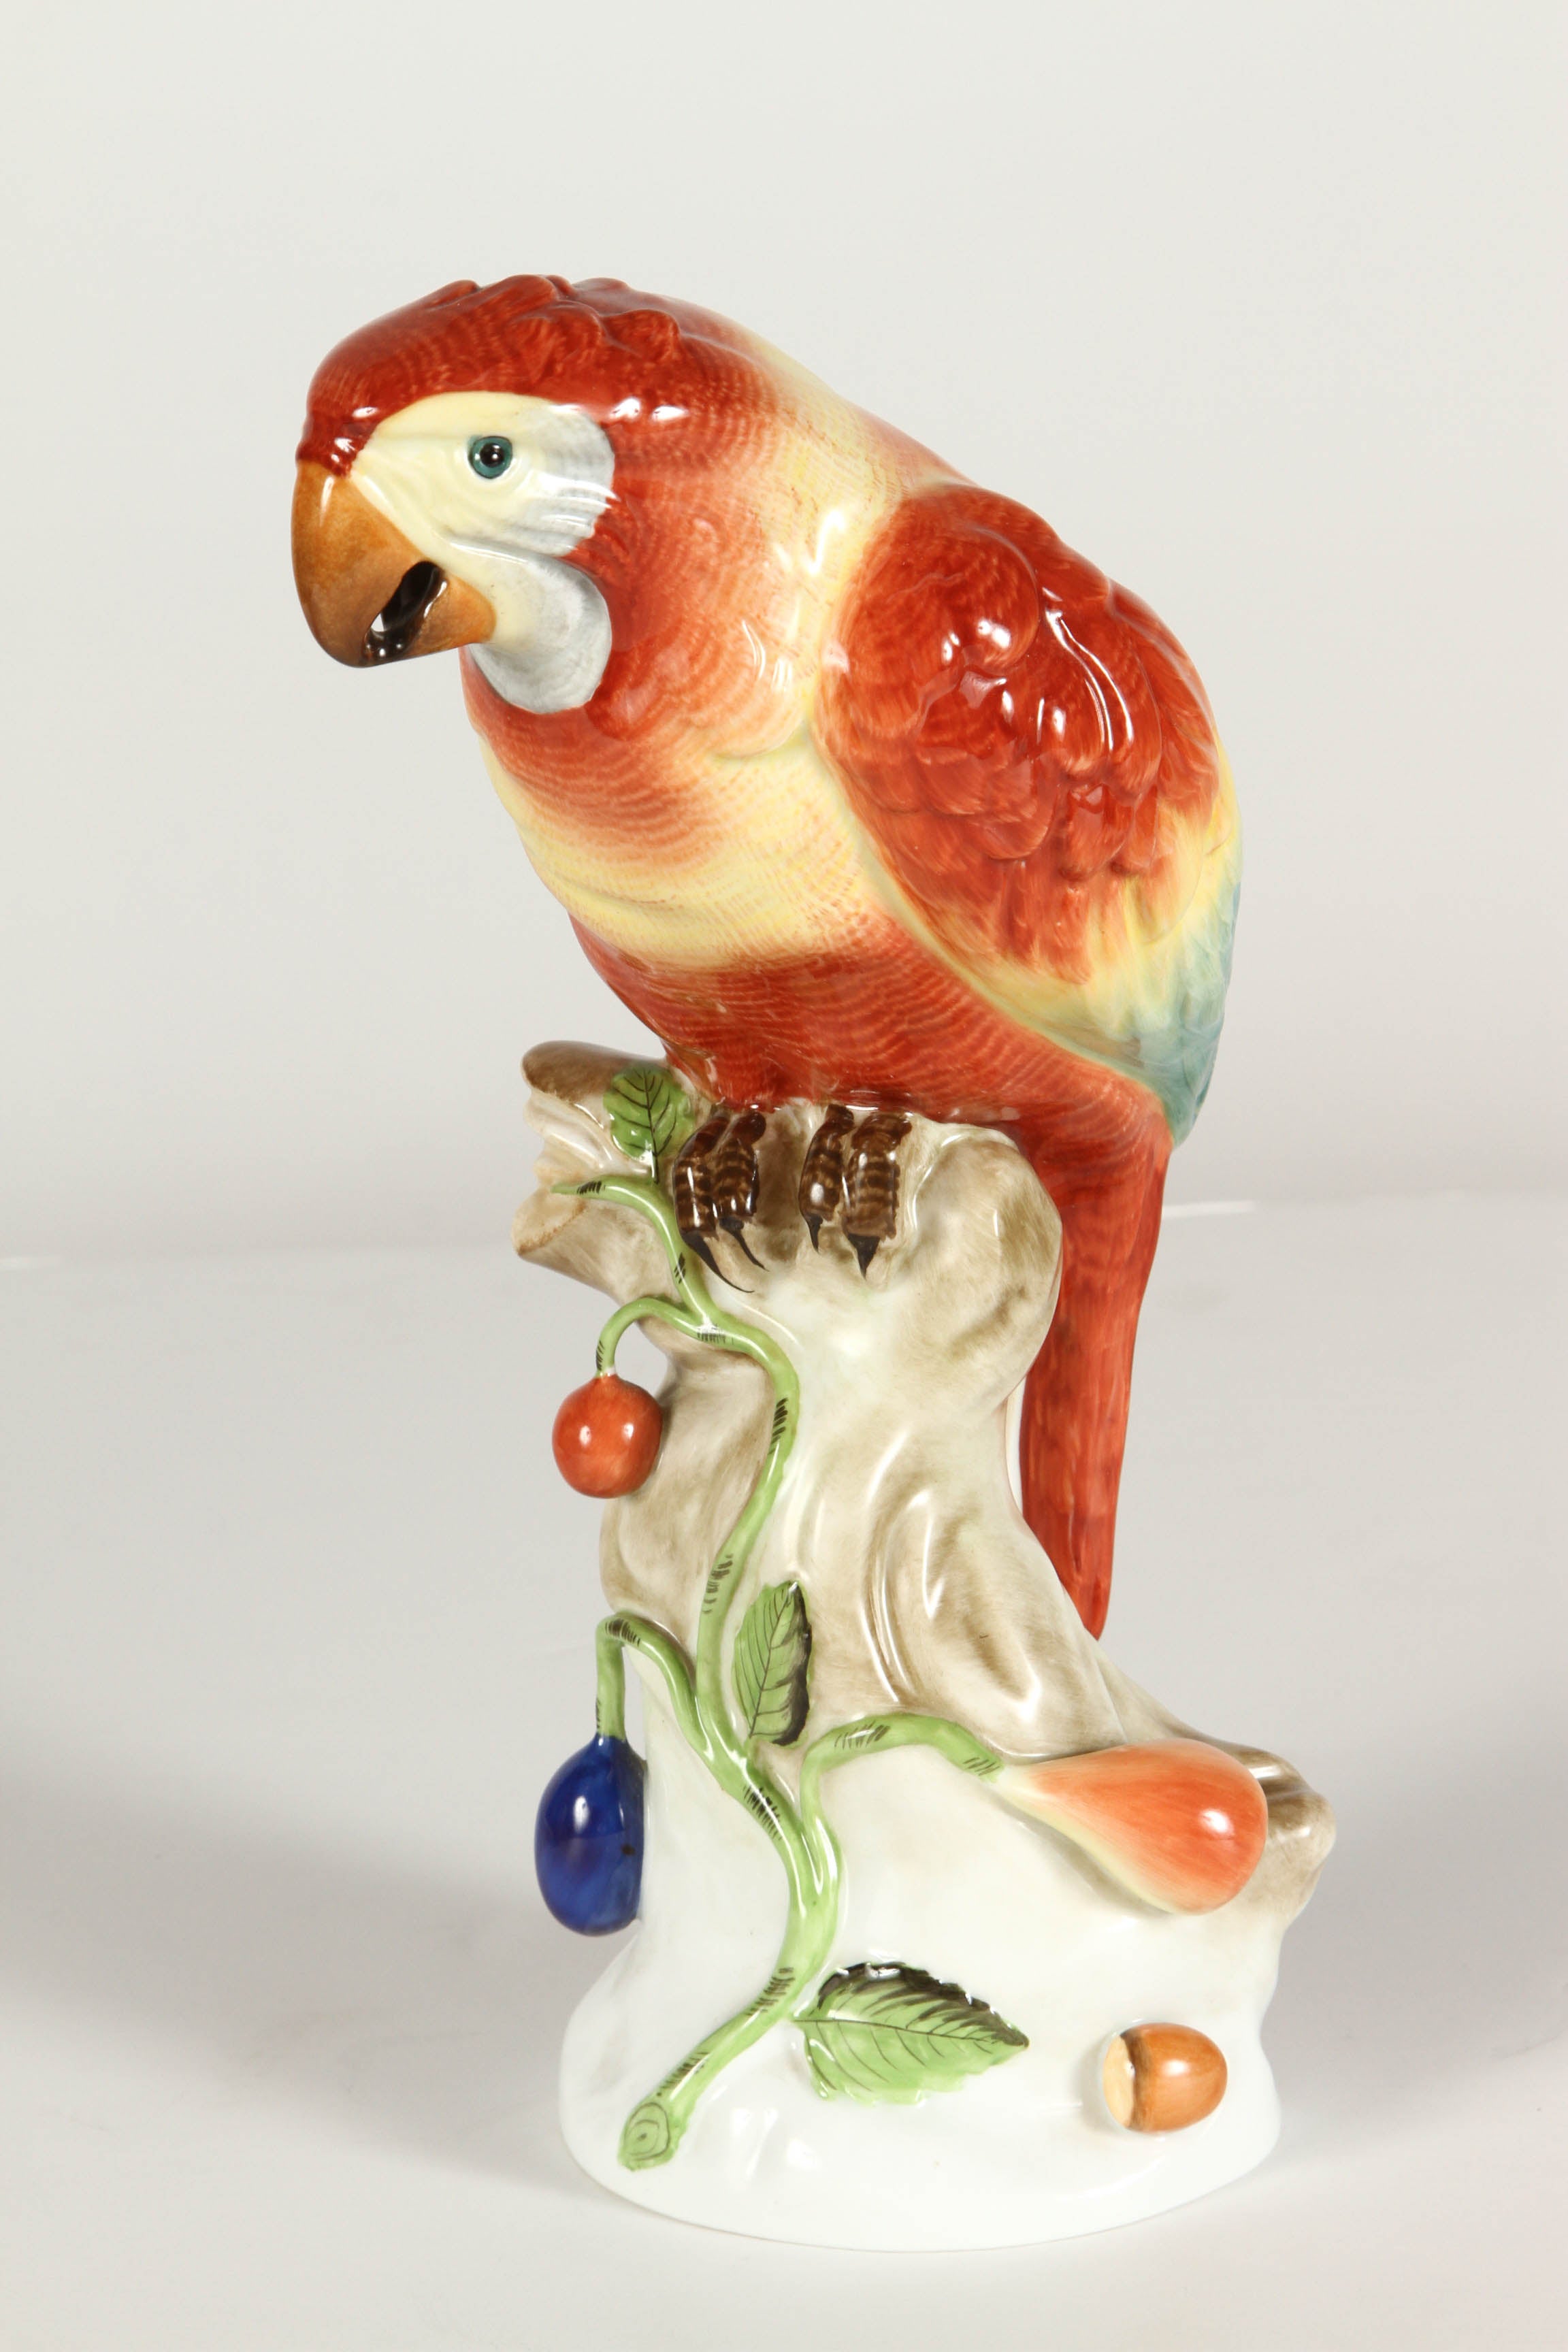 20th Century porcelain figurine of a sitting Parrot, created by Herend of Hungary. A bright-eyed heron with brown, yellow and blue green plumage is depicted sitting on a branch laden with fruit.